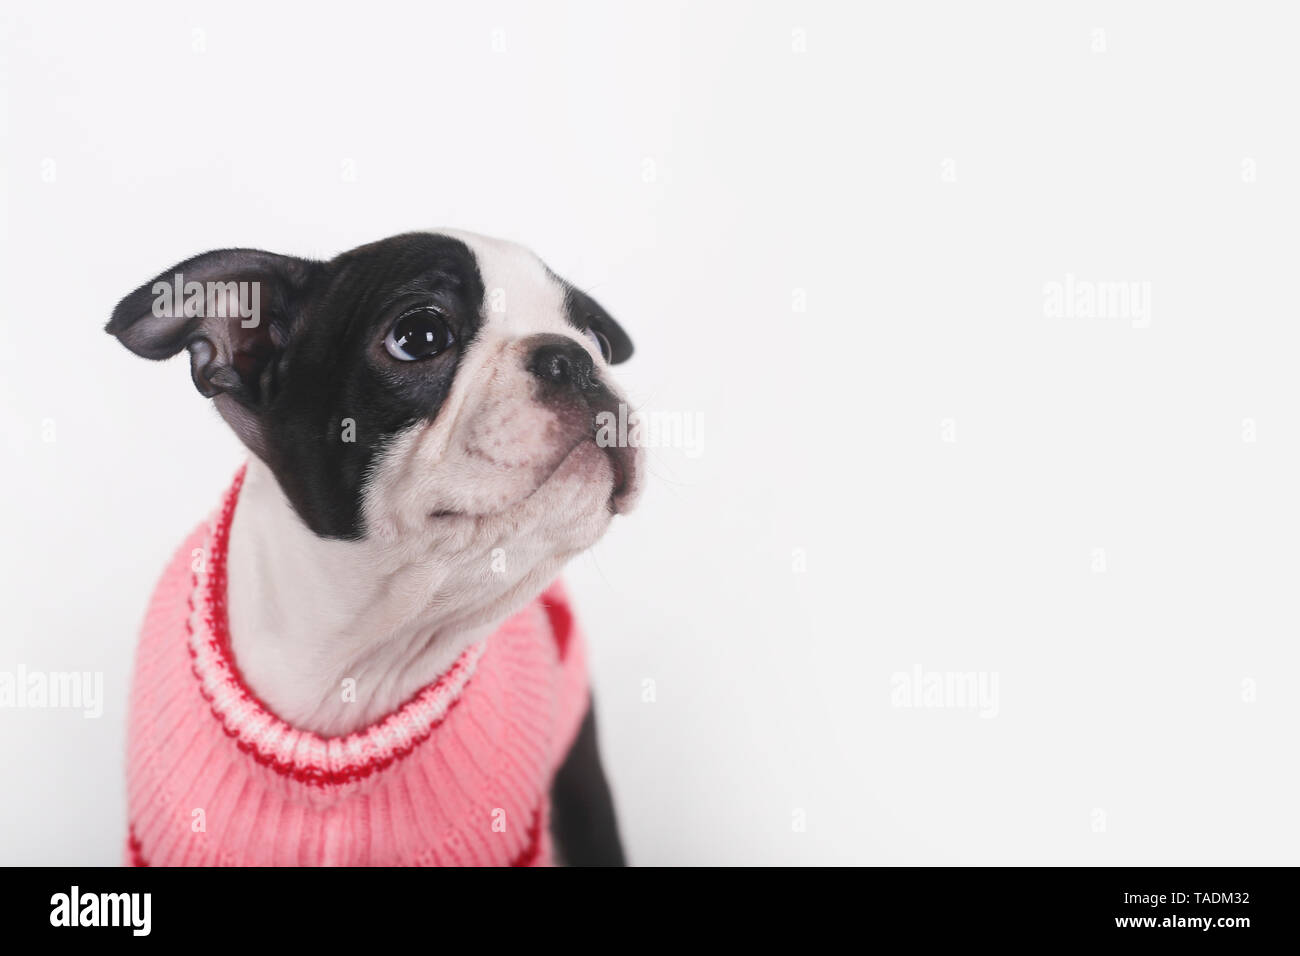 Boston terrier puppy wearing pink pullover watching something Stock Photo